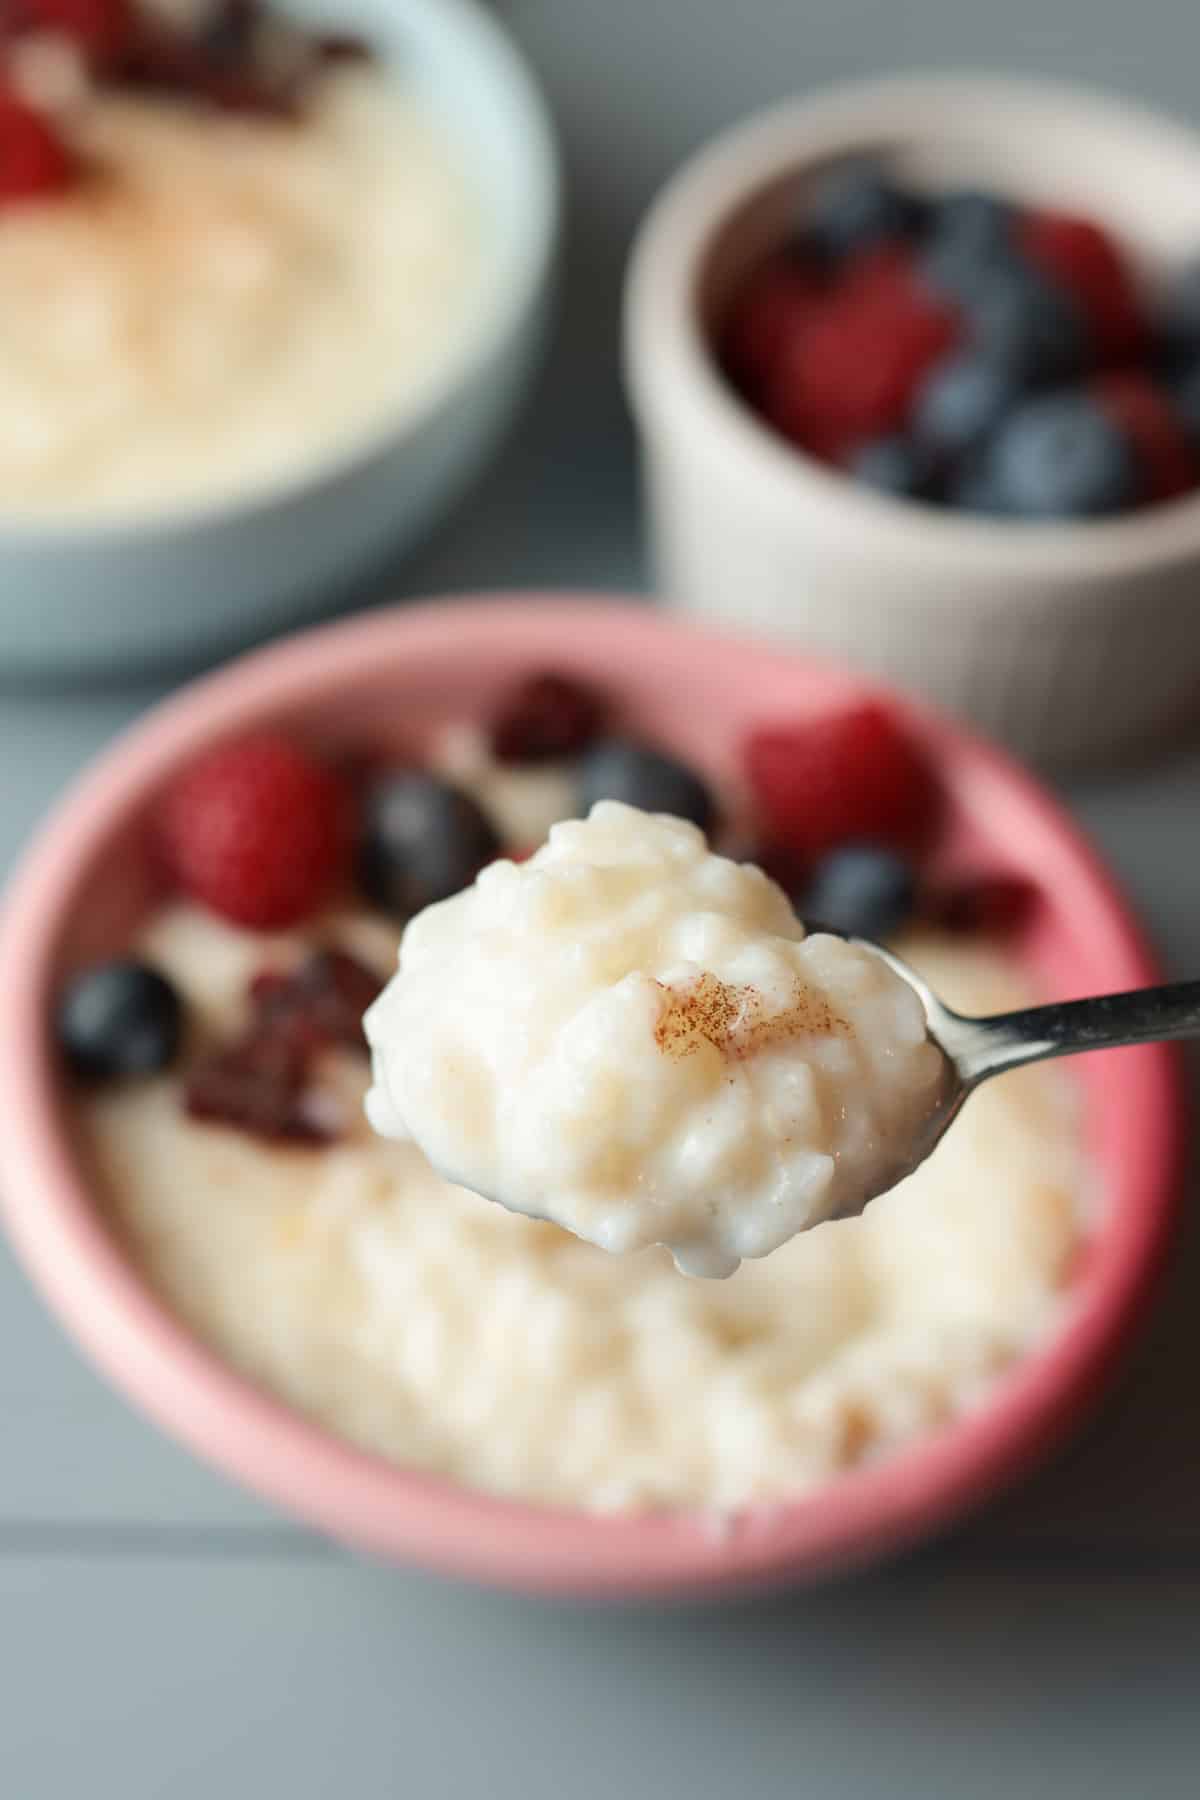 Spoonful rice pudding